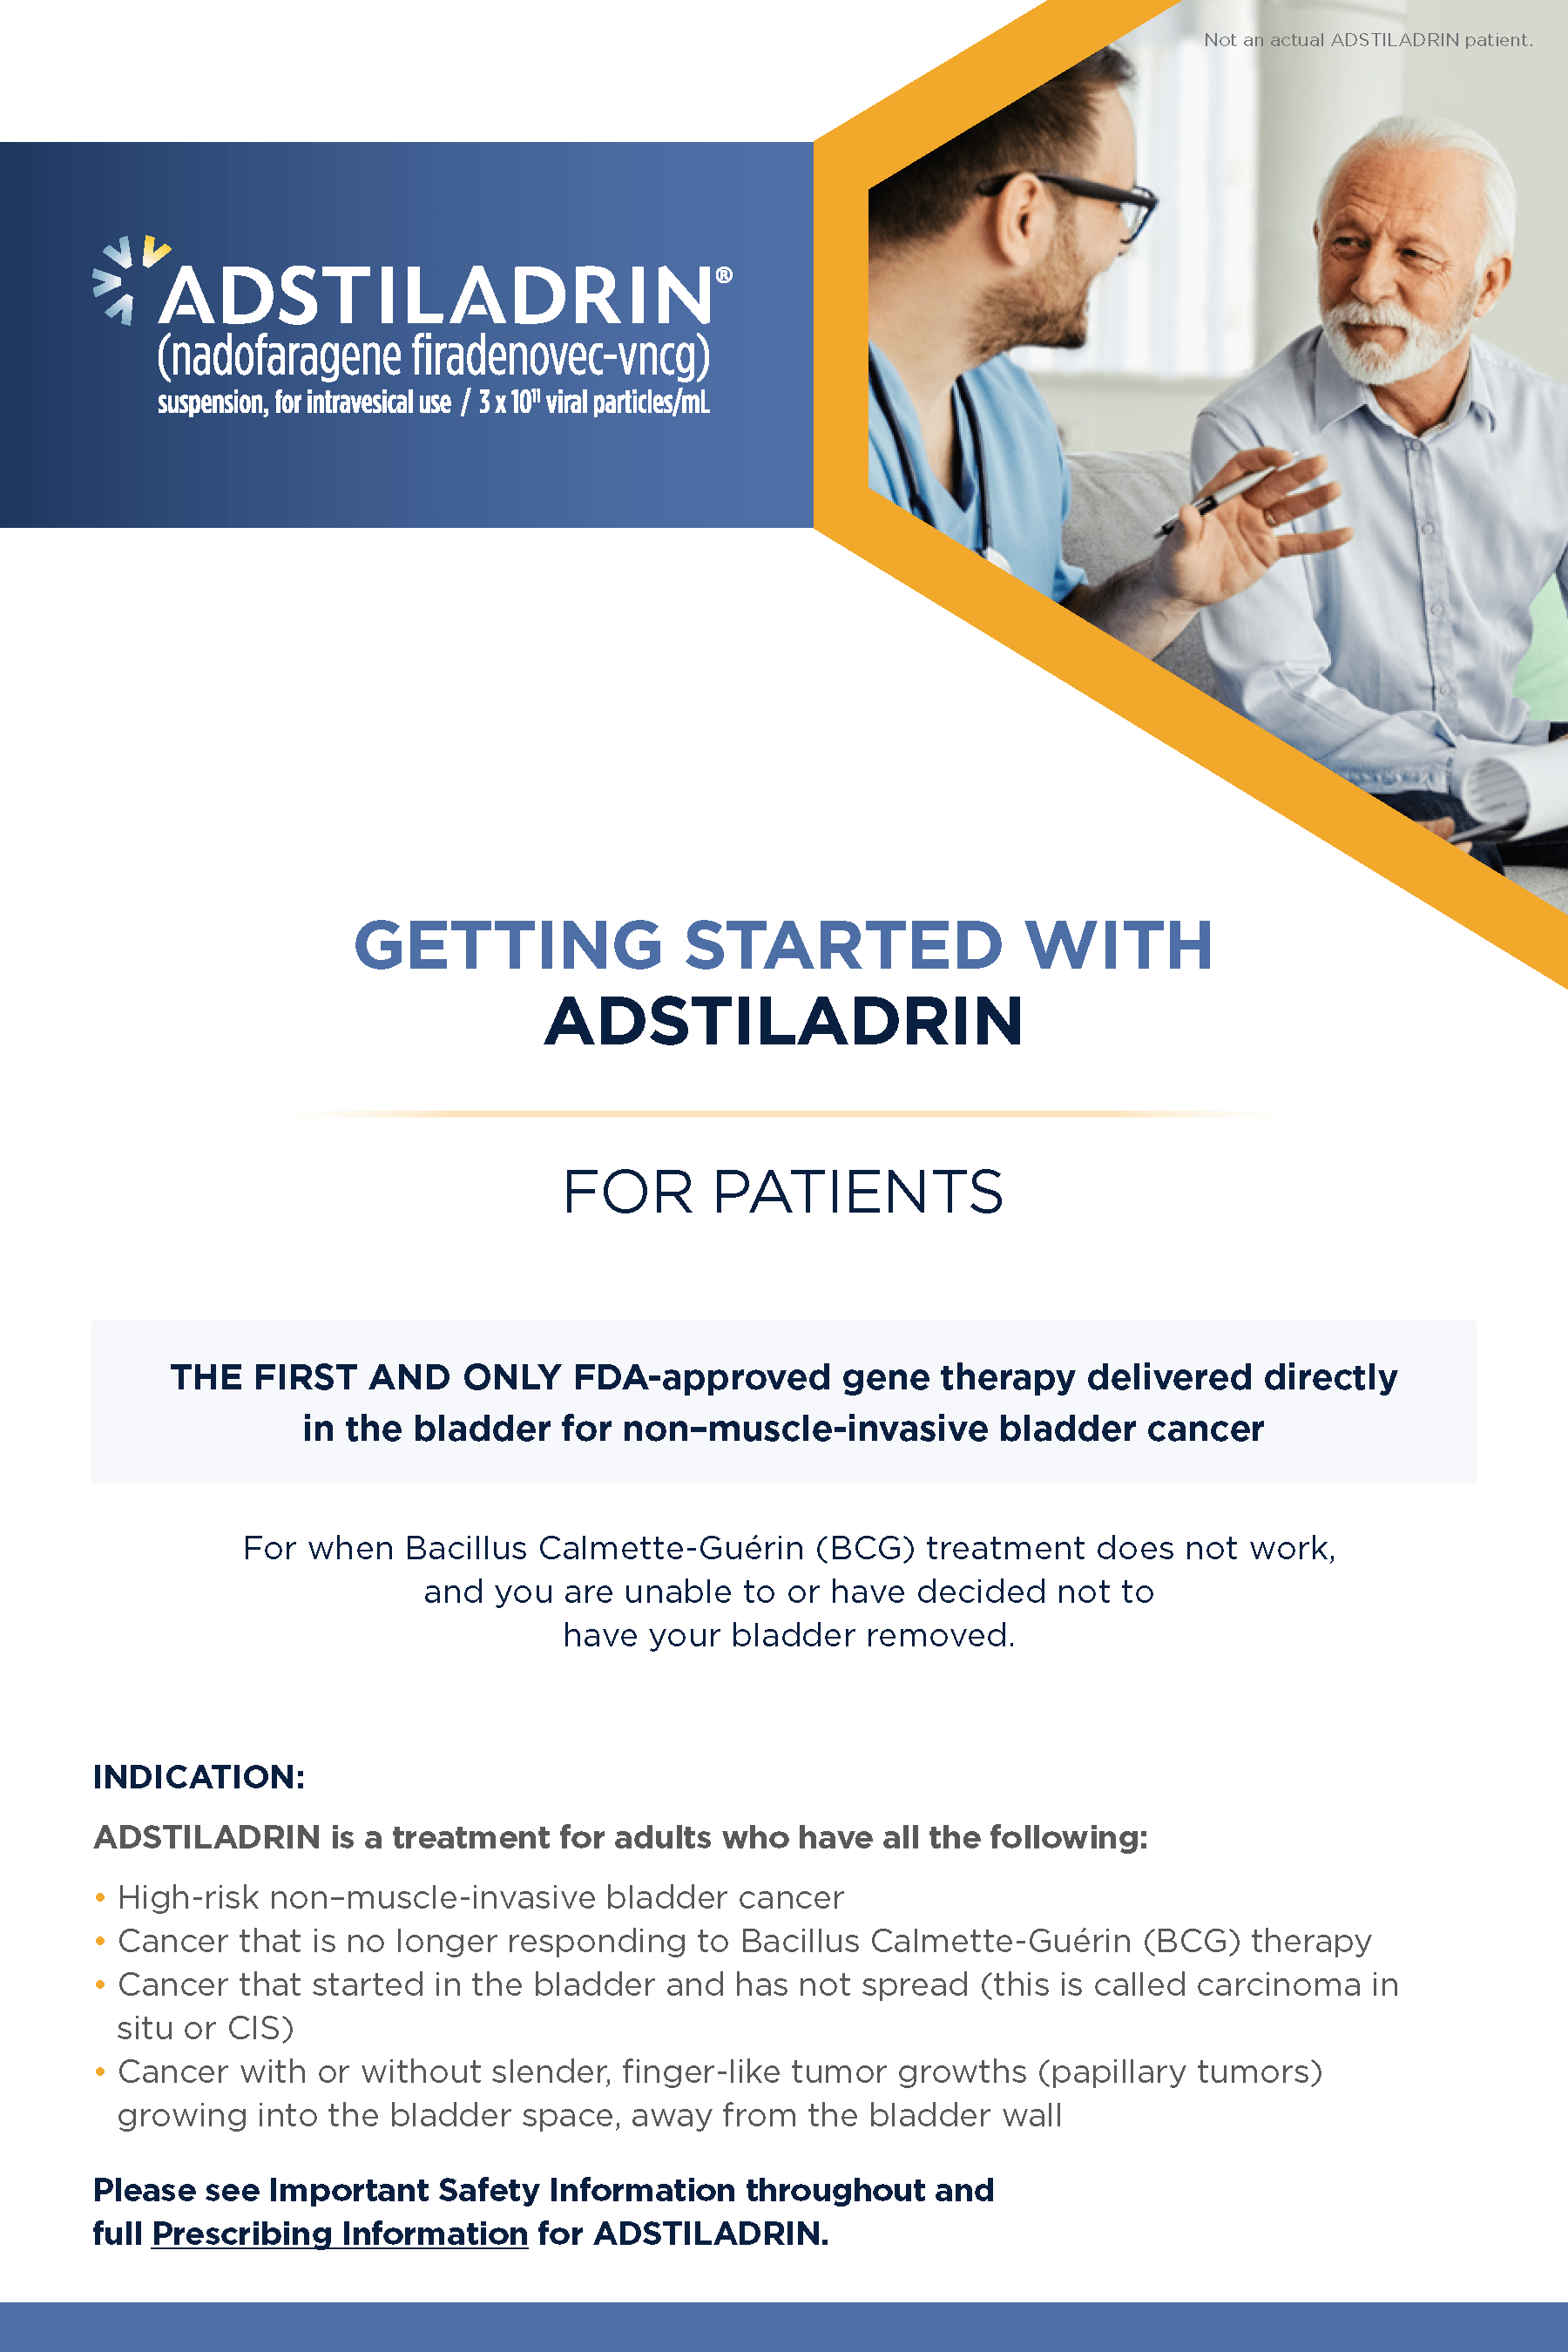 Downloadable guide for patients getting started with ADSTILADRIN